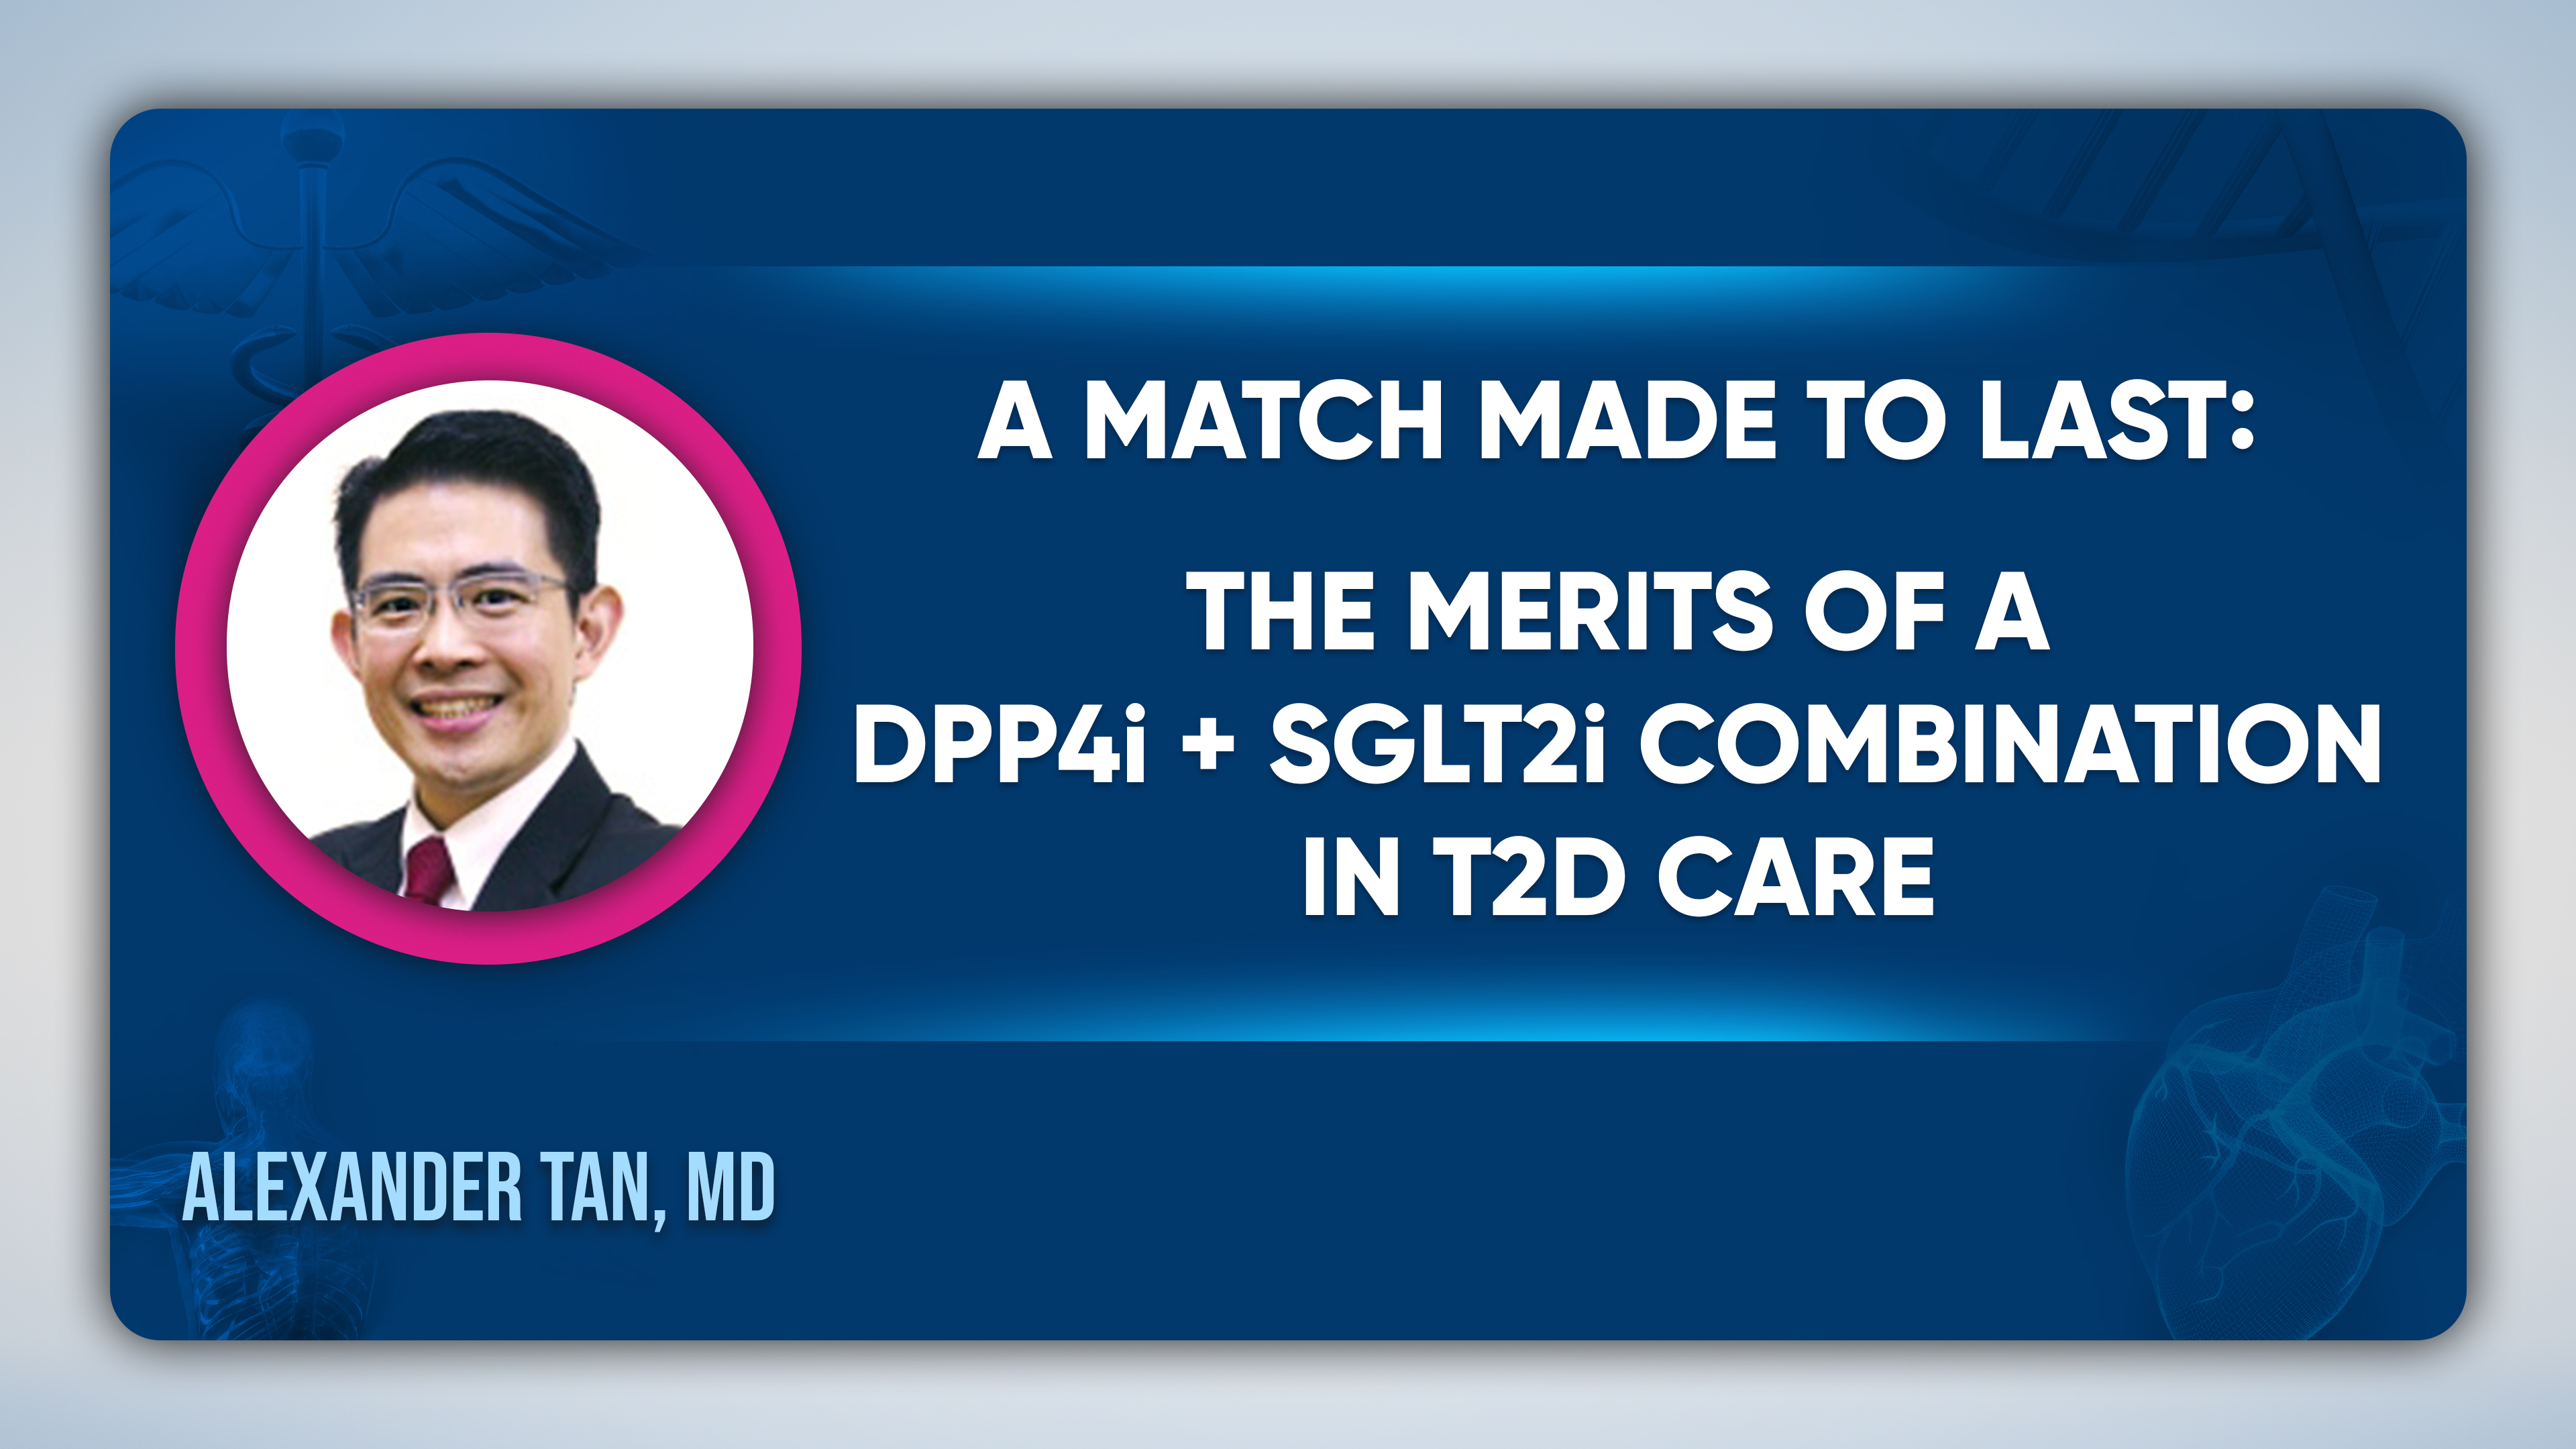 A Match Made to Last: The Merits of a DPP4i + SGLT2i Combination in T2D Care